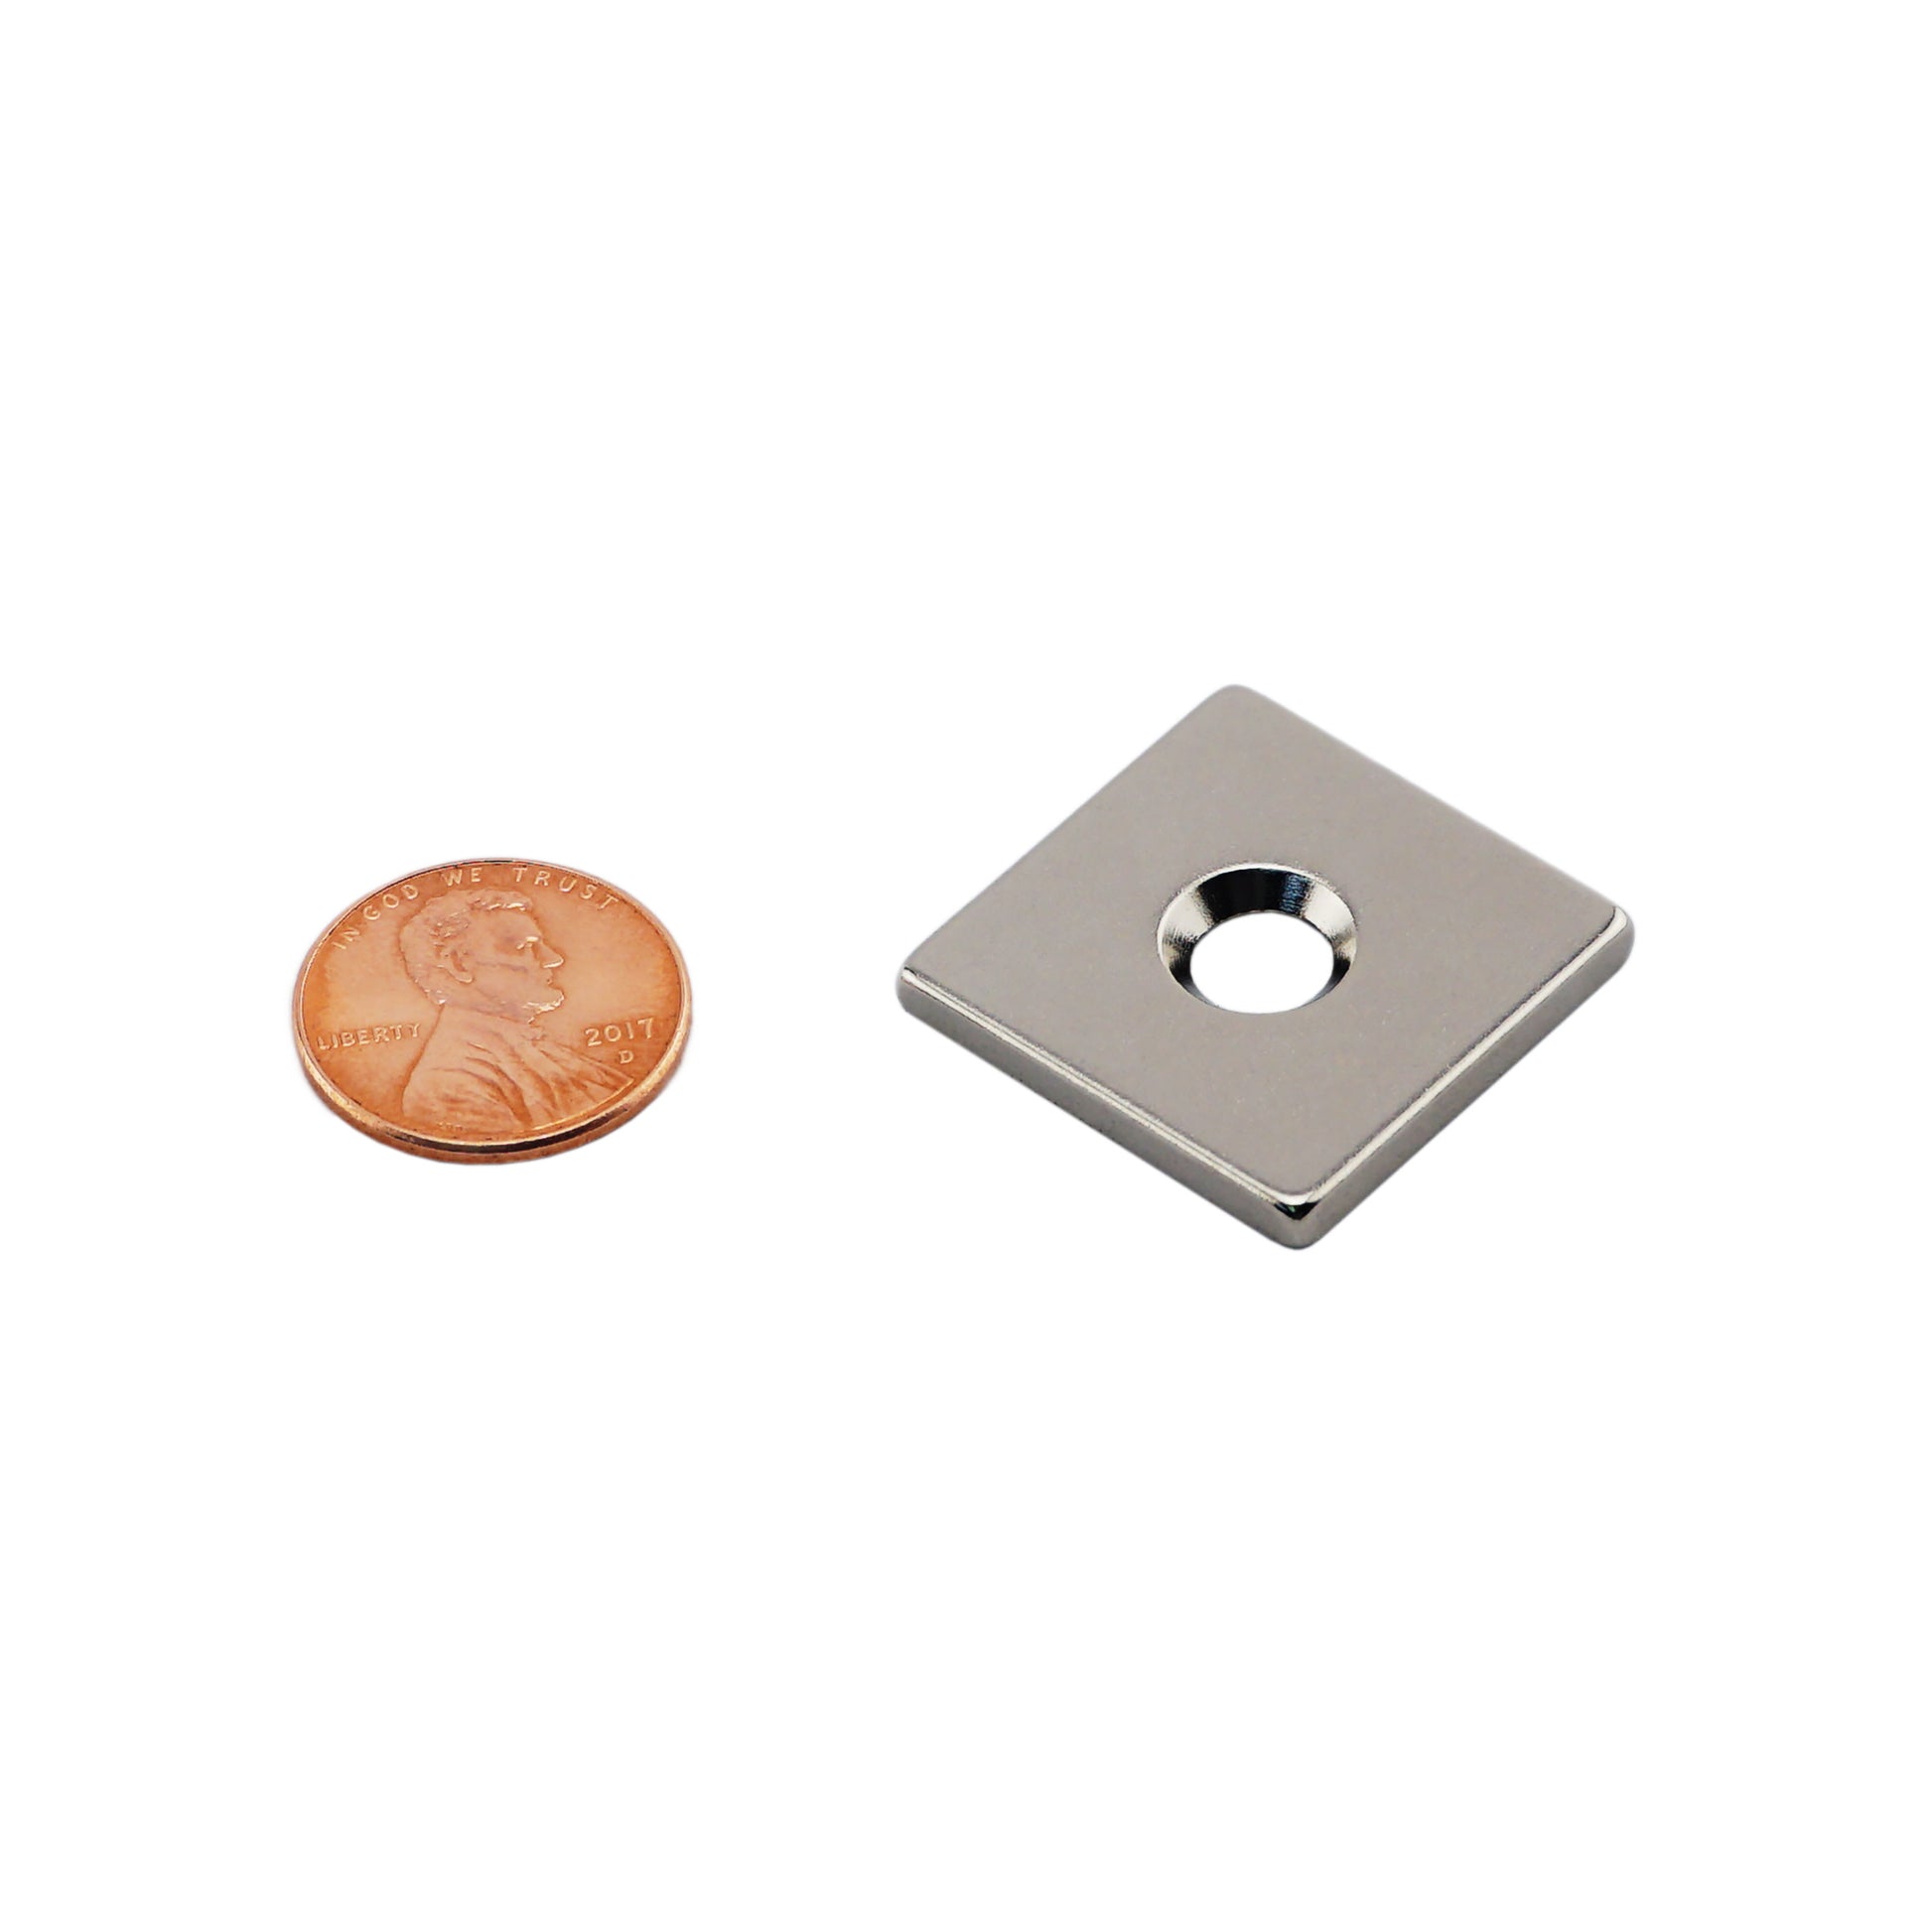 Load image into Gallery viewer, NB001220NCTS Neodymium Countersunk Block Magnet - Compared to Penny for Size Reference